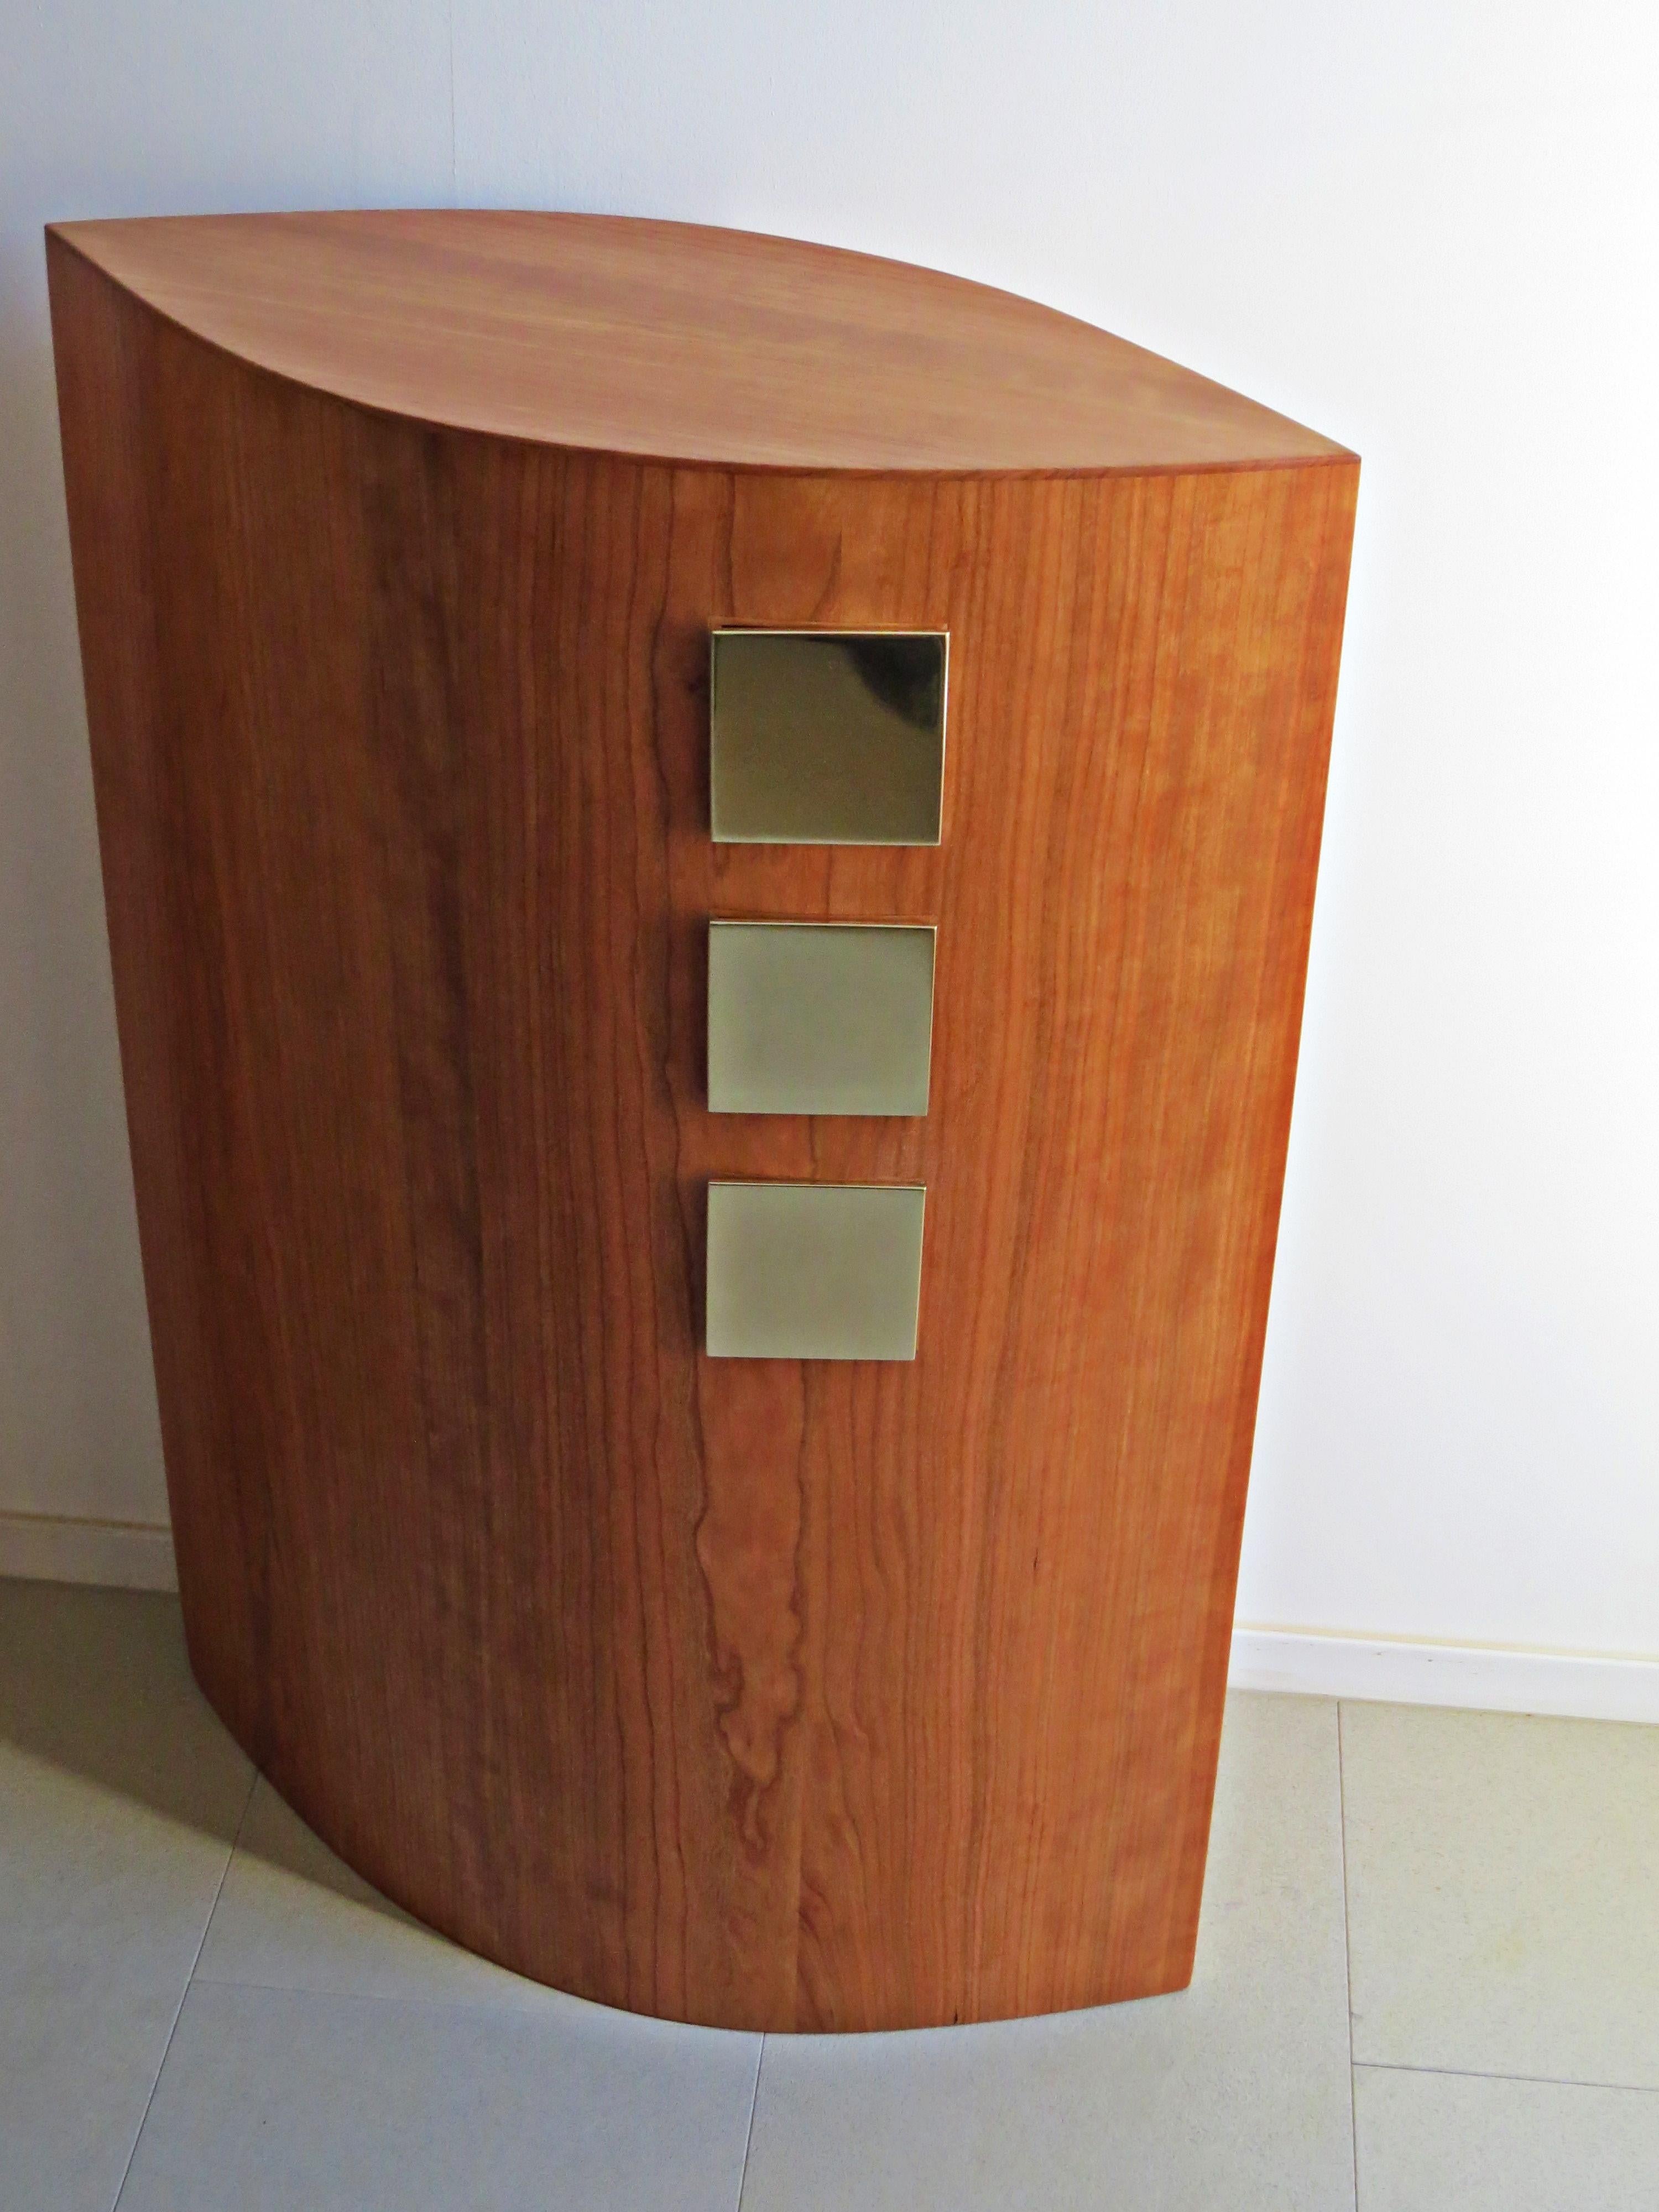 Hand-Crafted Console, Cherry Wood, Brass Drawers, Handmade in Germany For Sale